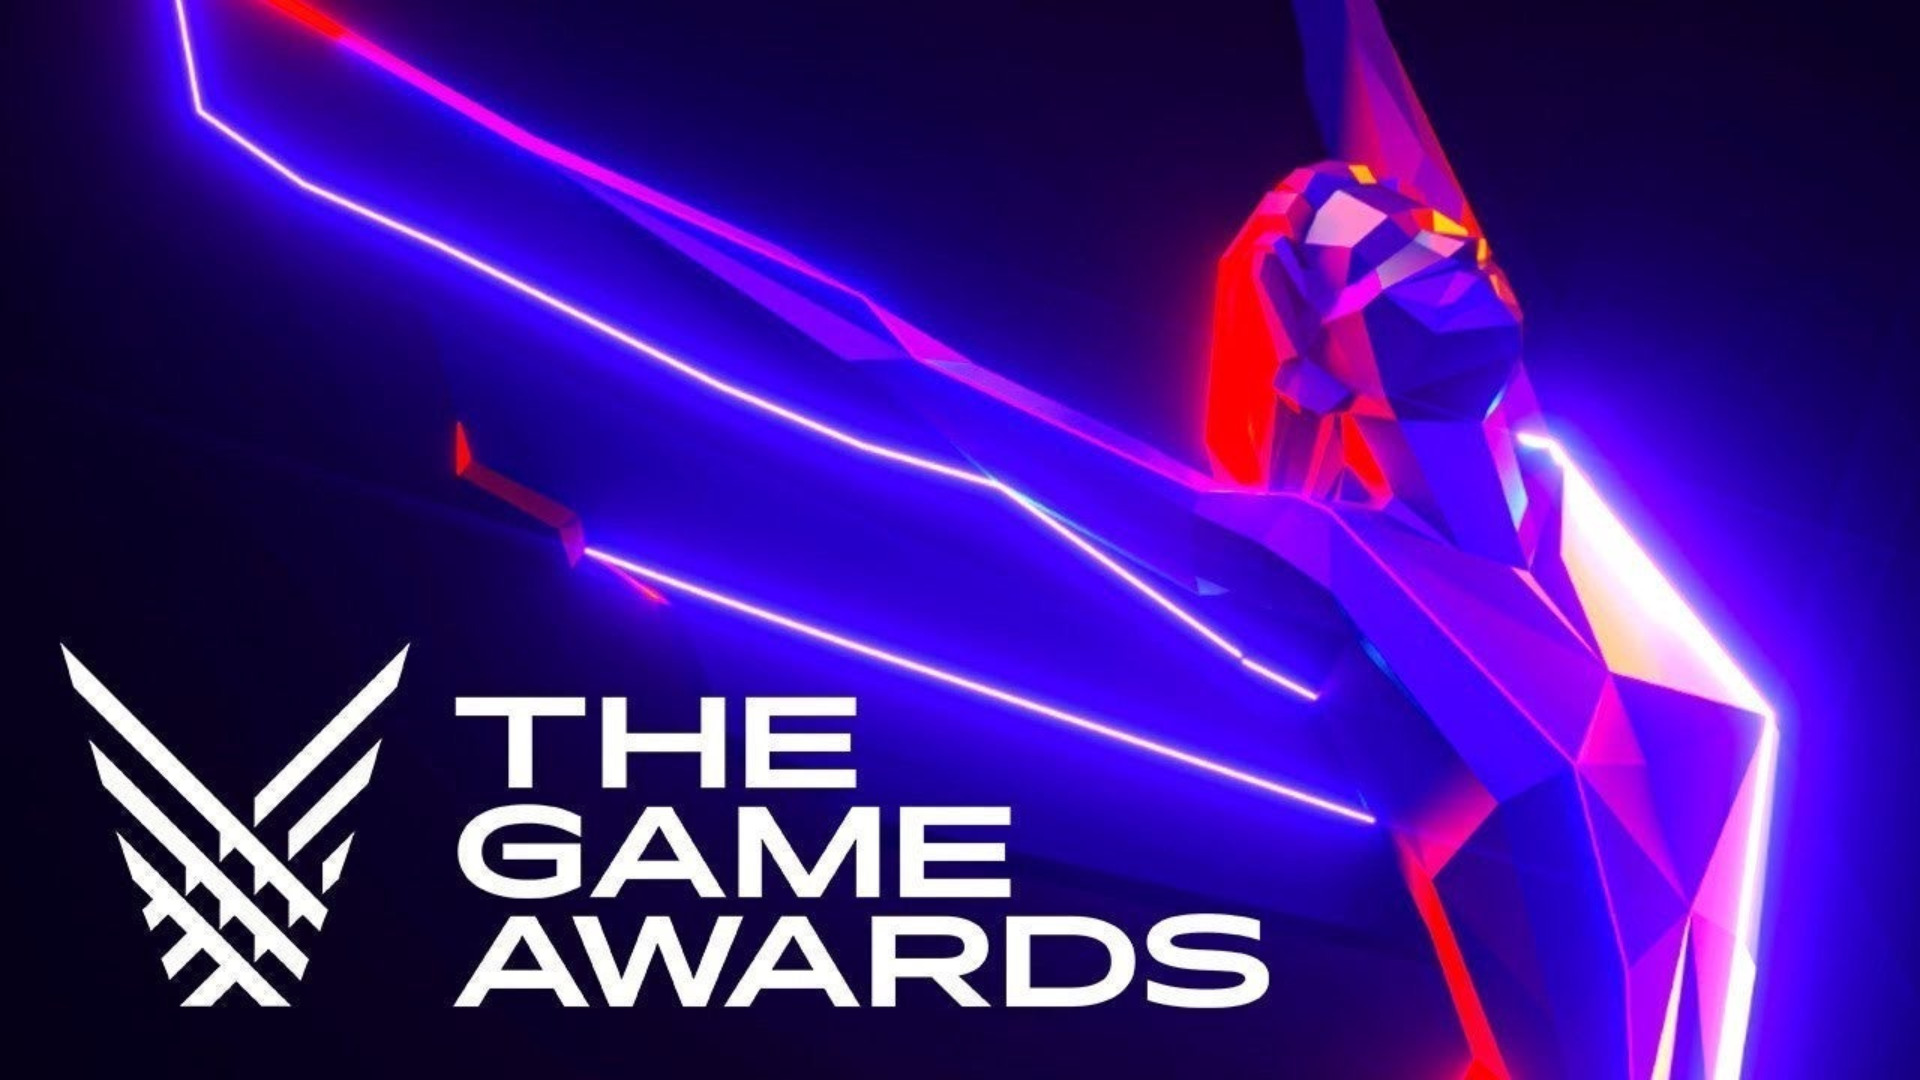 Here are your 2023 The Game Awards nominees